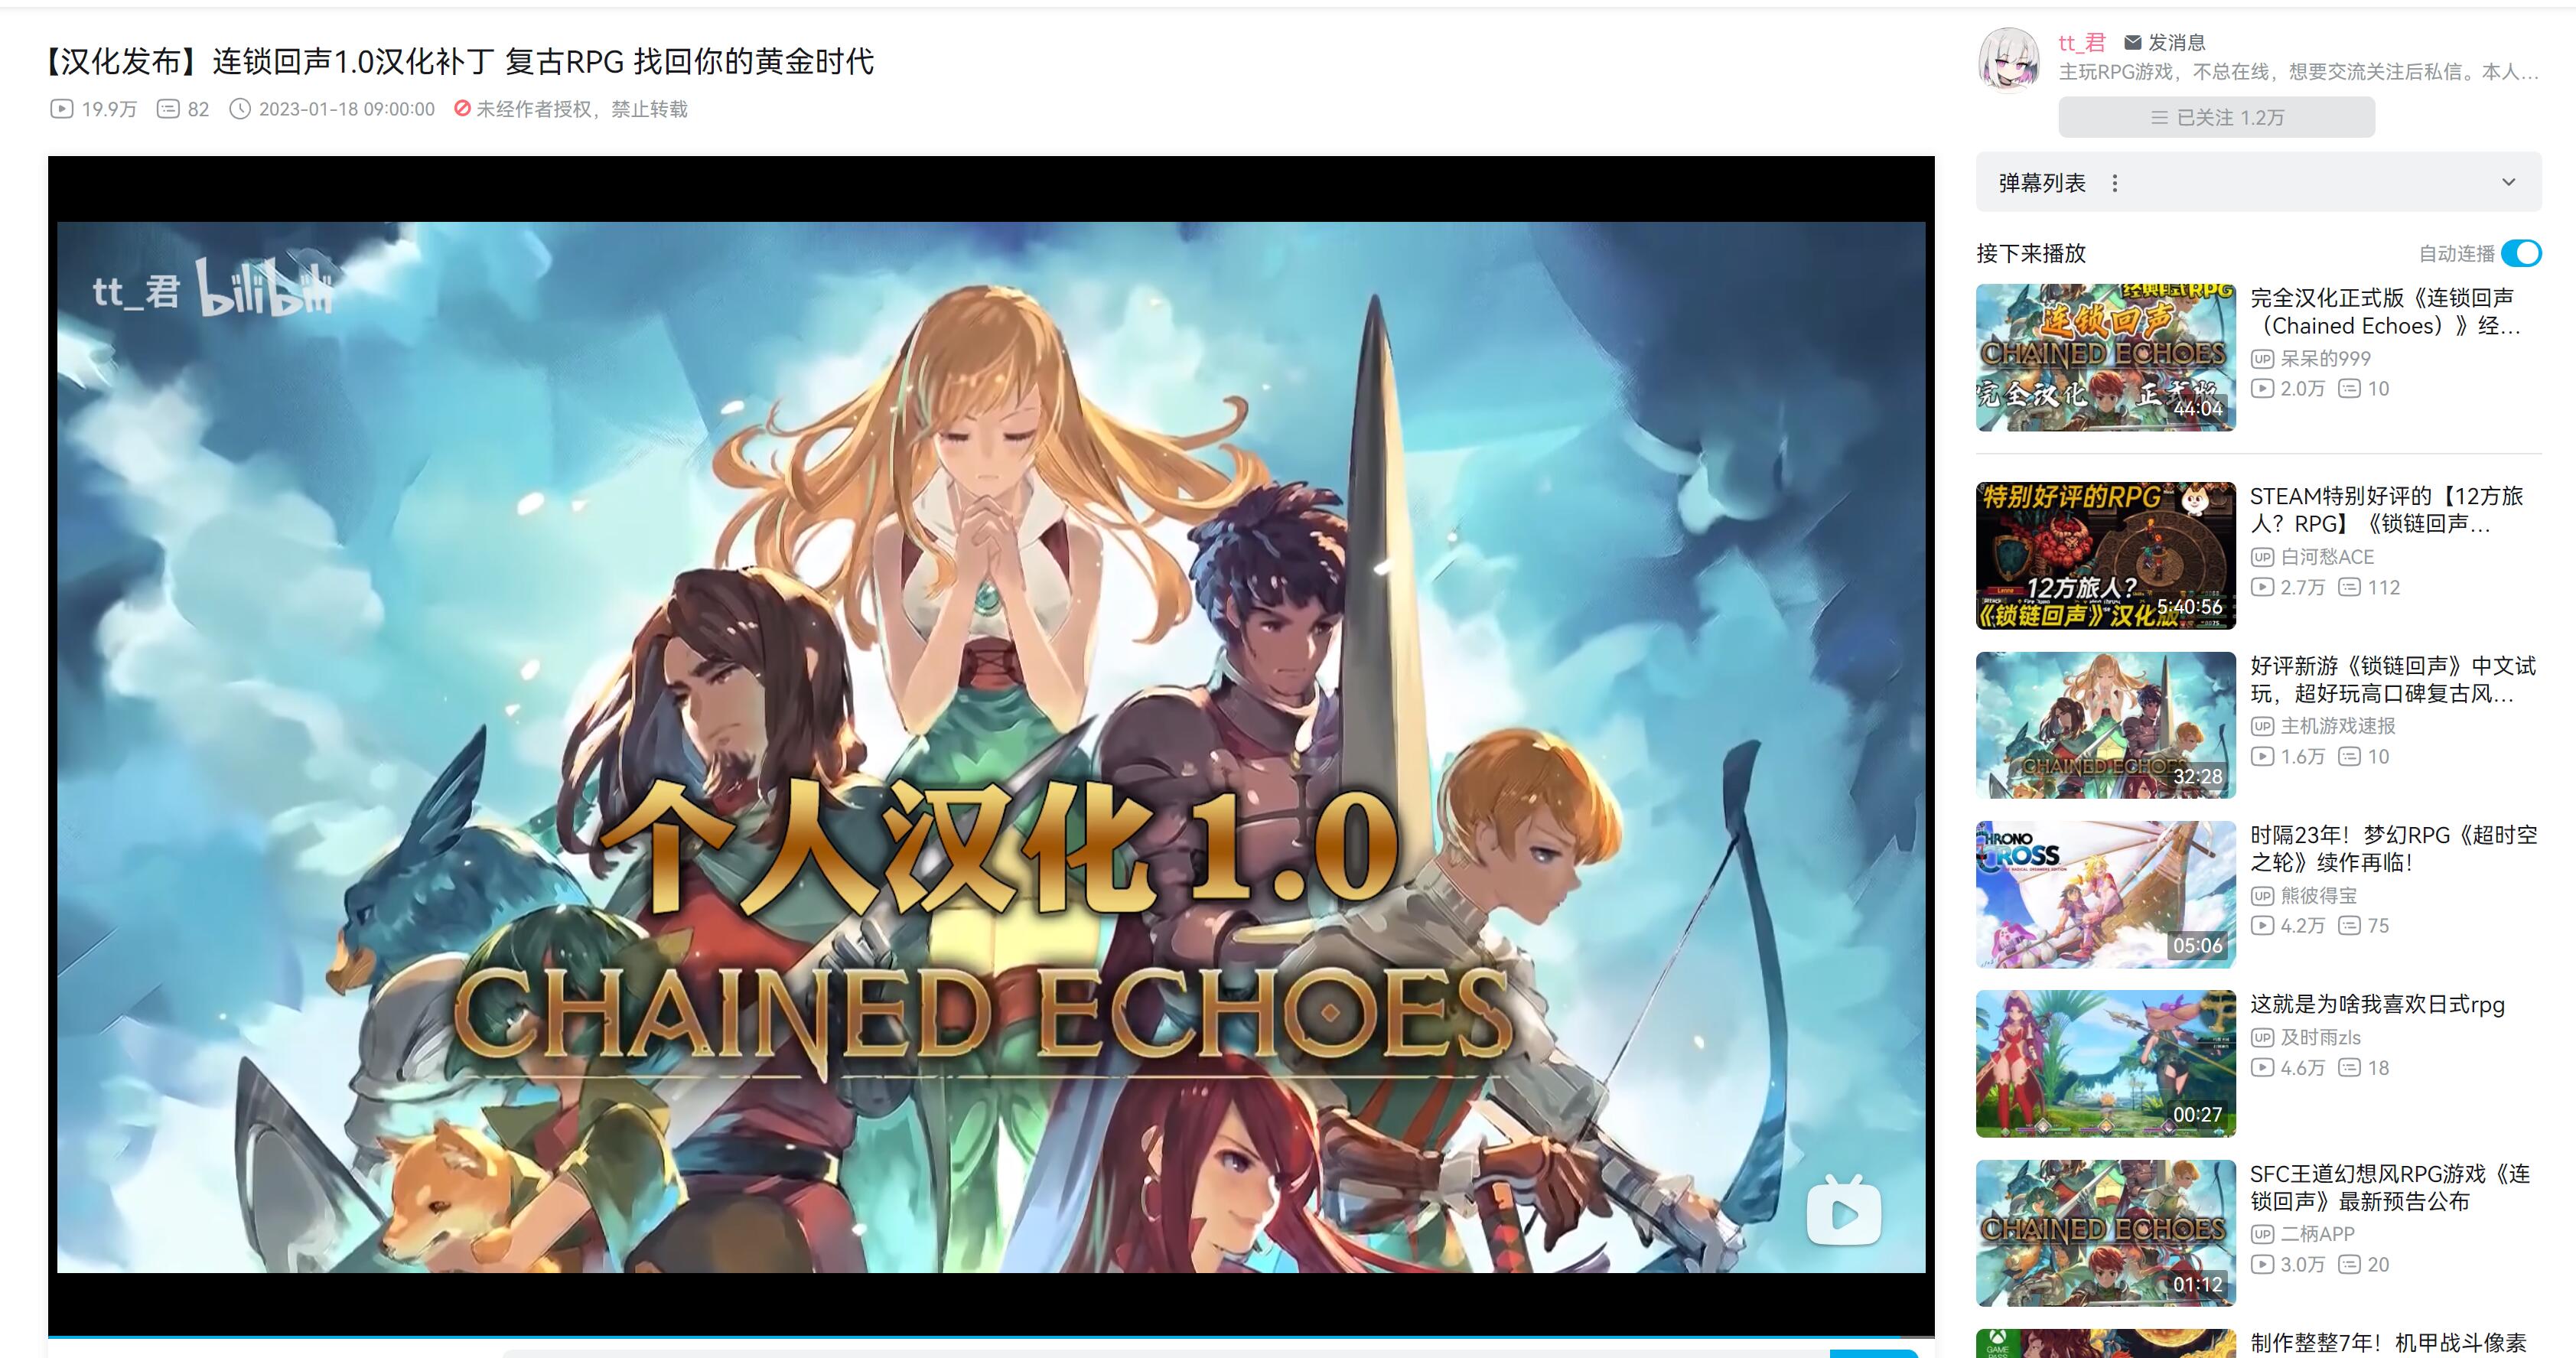 《Chained Echoes》：來自JRPG黃金年代的一聲-第2張